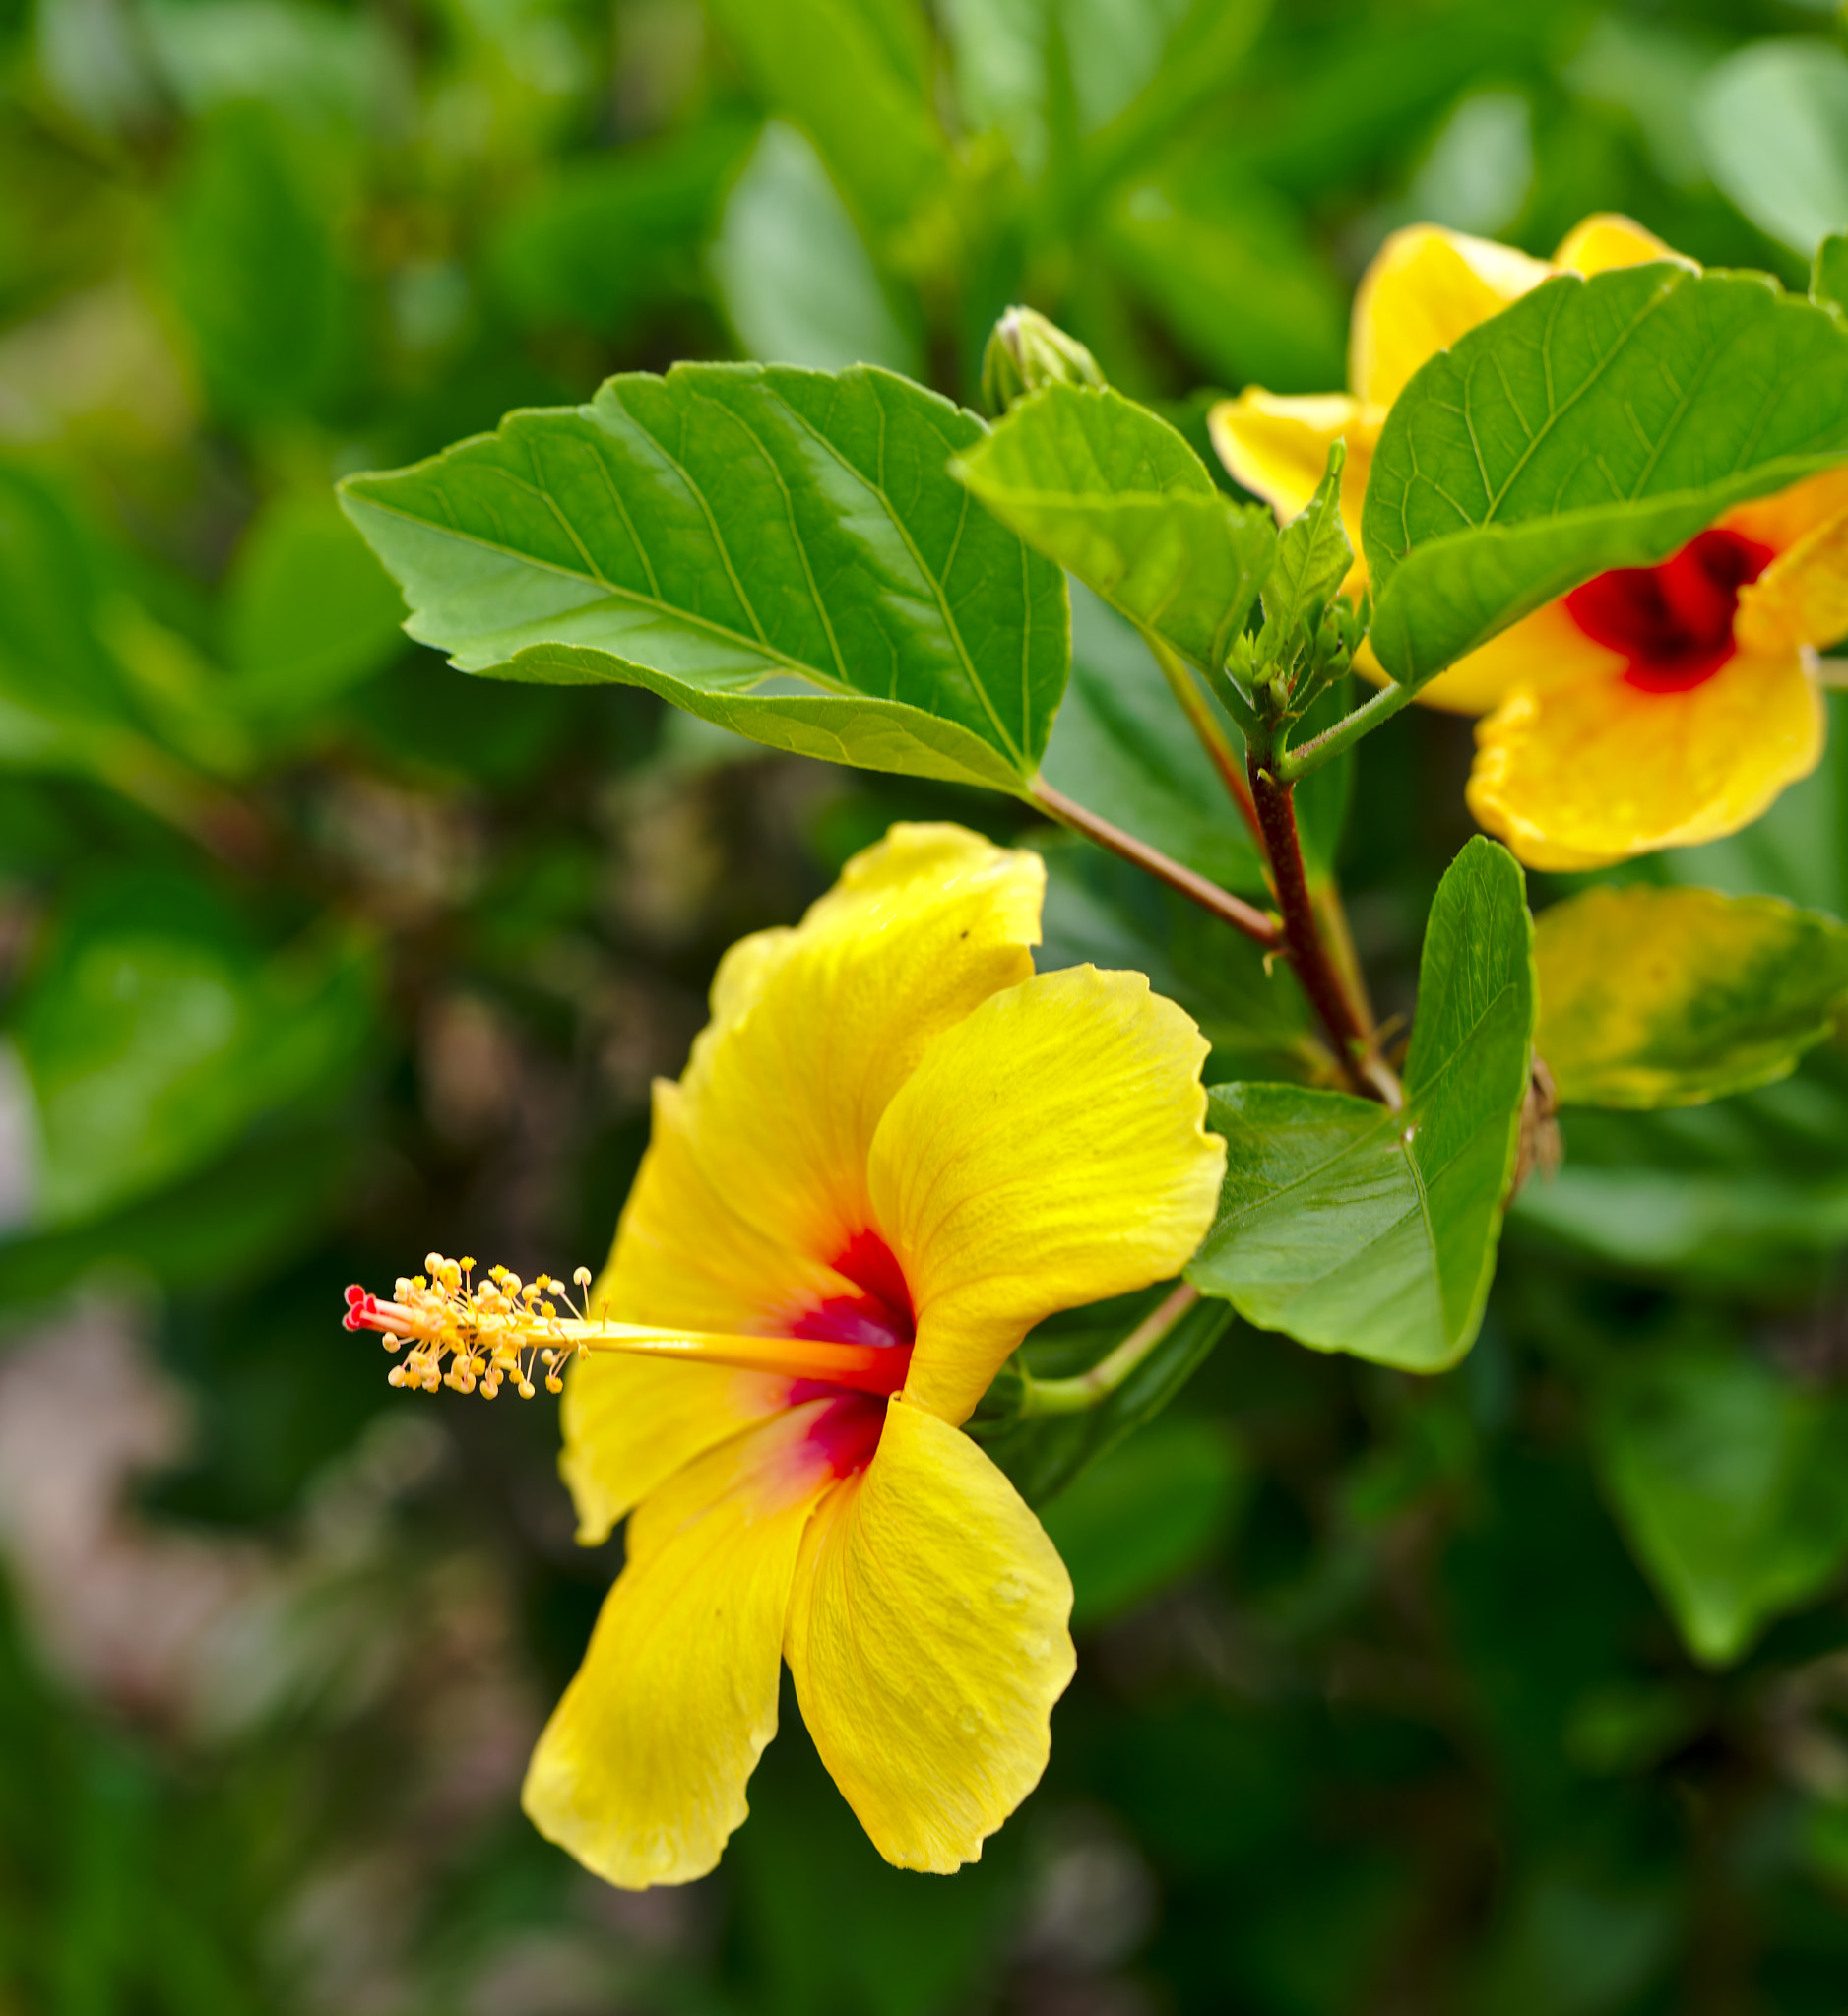 ZEISS Otus 85mm F1.4 sample photo. A yellow hibiscus photography